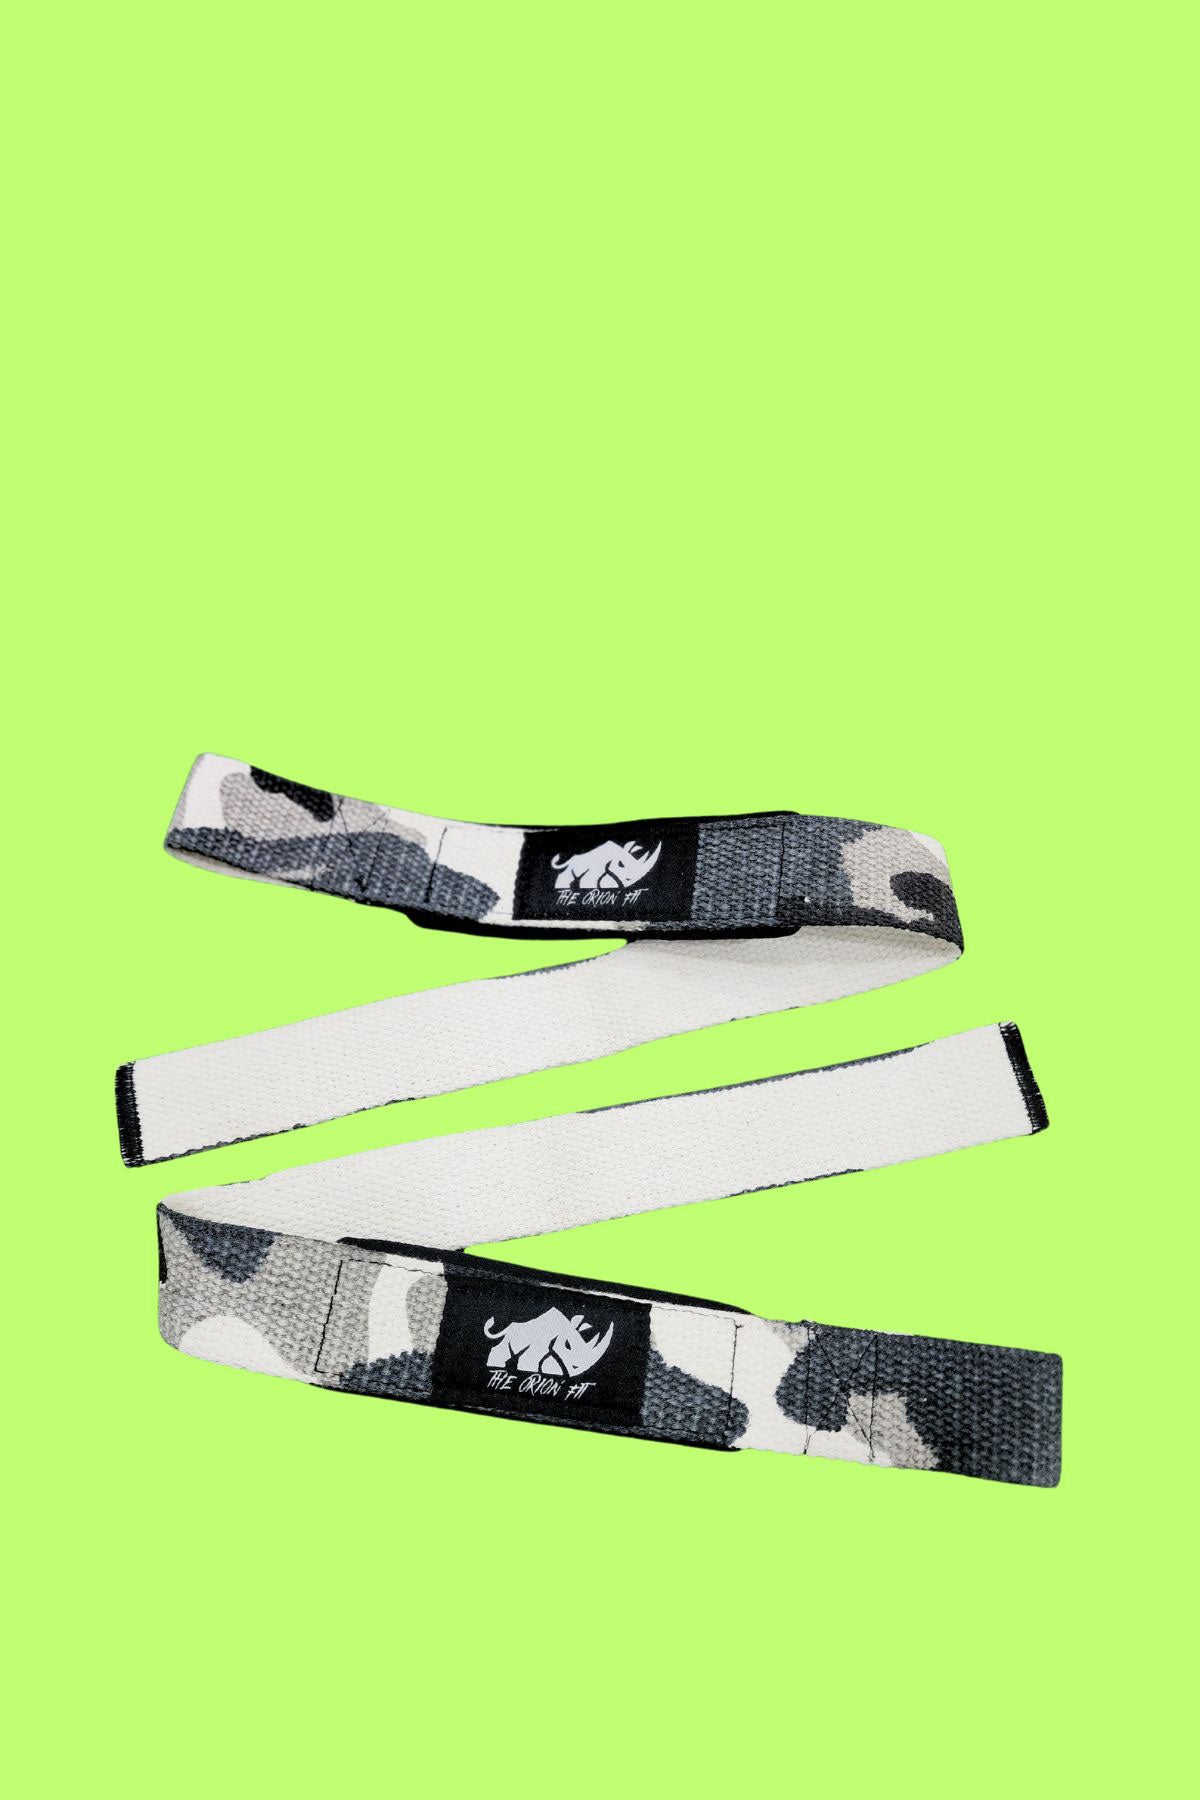 AMPLIFY DEAD LIFT EXTRA COMFORT STRAPS- CAMO SILVER - The Orion Fit